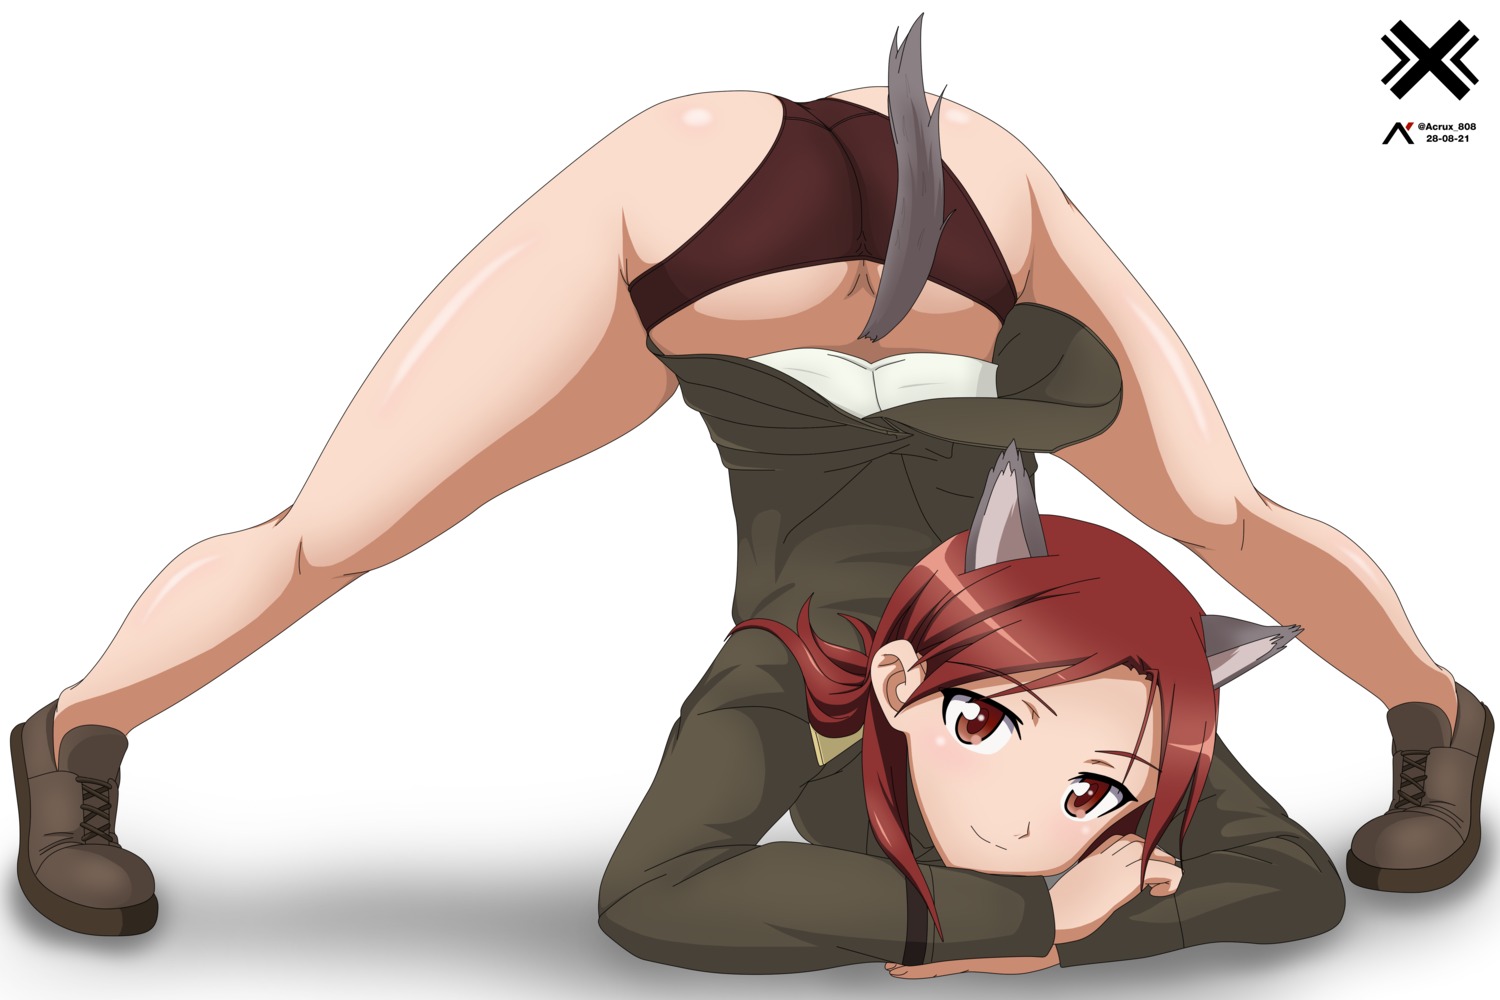 acrux animal_ears ass gertrud_barkhorn inumimi pantsu strike_witches strike_witches:_operation_victory_arrow strike_witches_2 strike_witches_gekijouban tail uniform